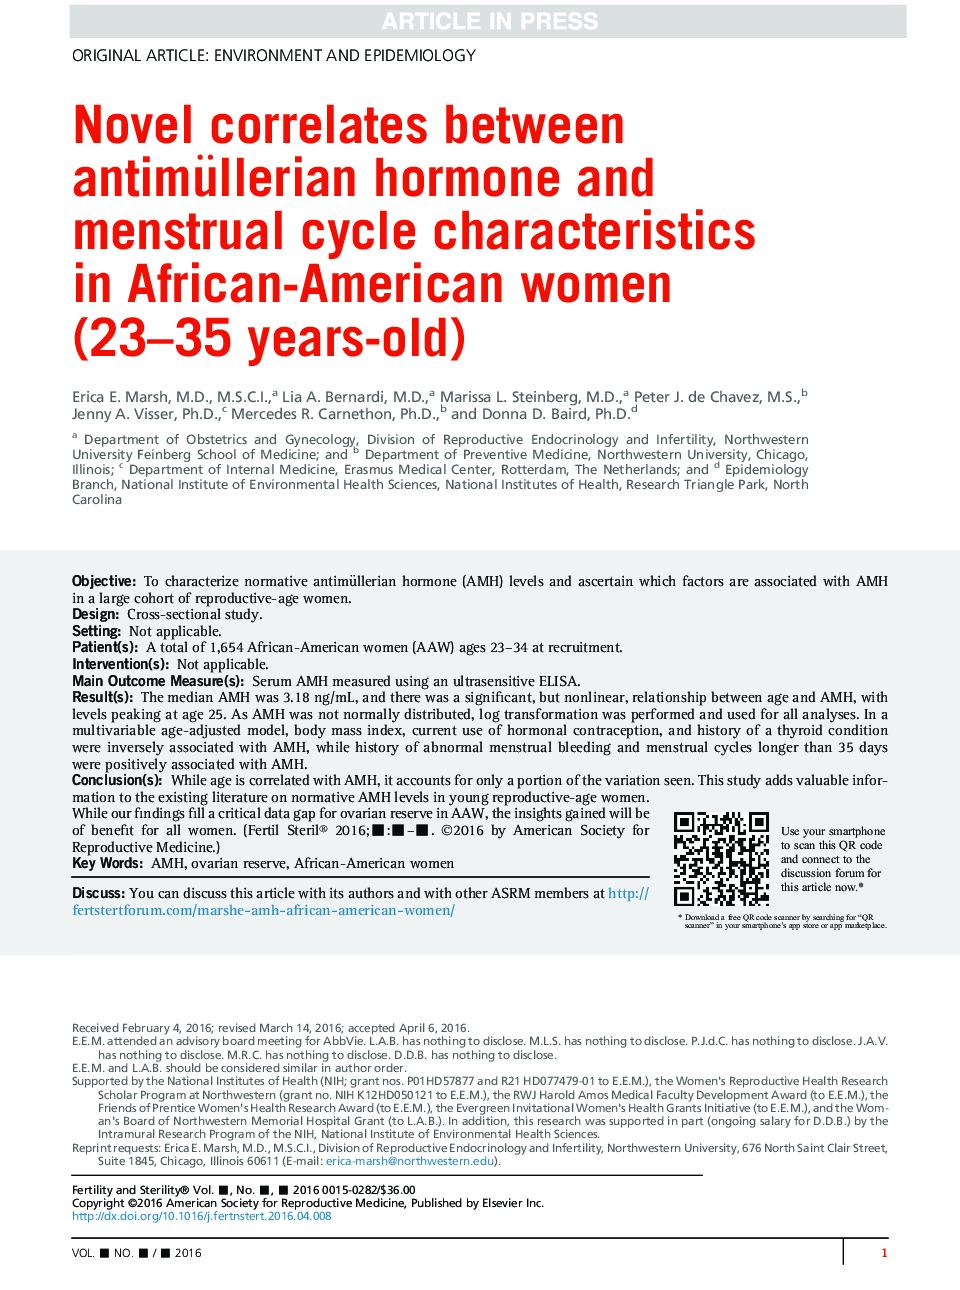 Novel correlates between antimüllerian hormone and menstrualÂ cycle characteristics inÂ African-American women (23-35Â years-old)